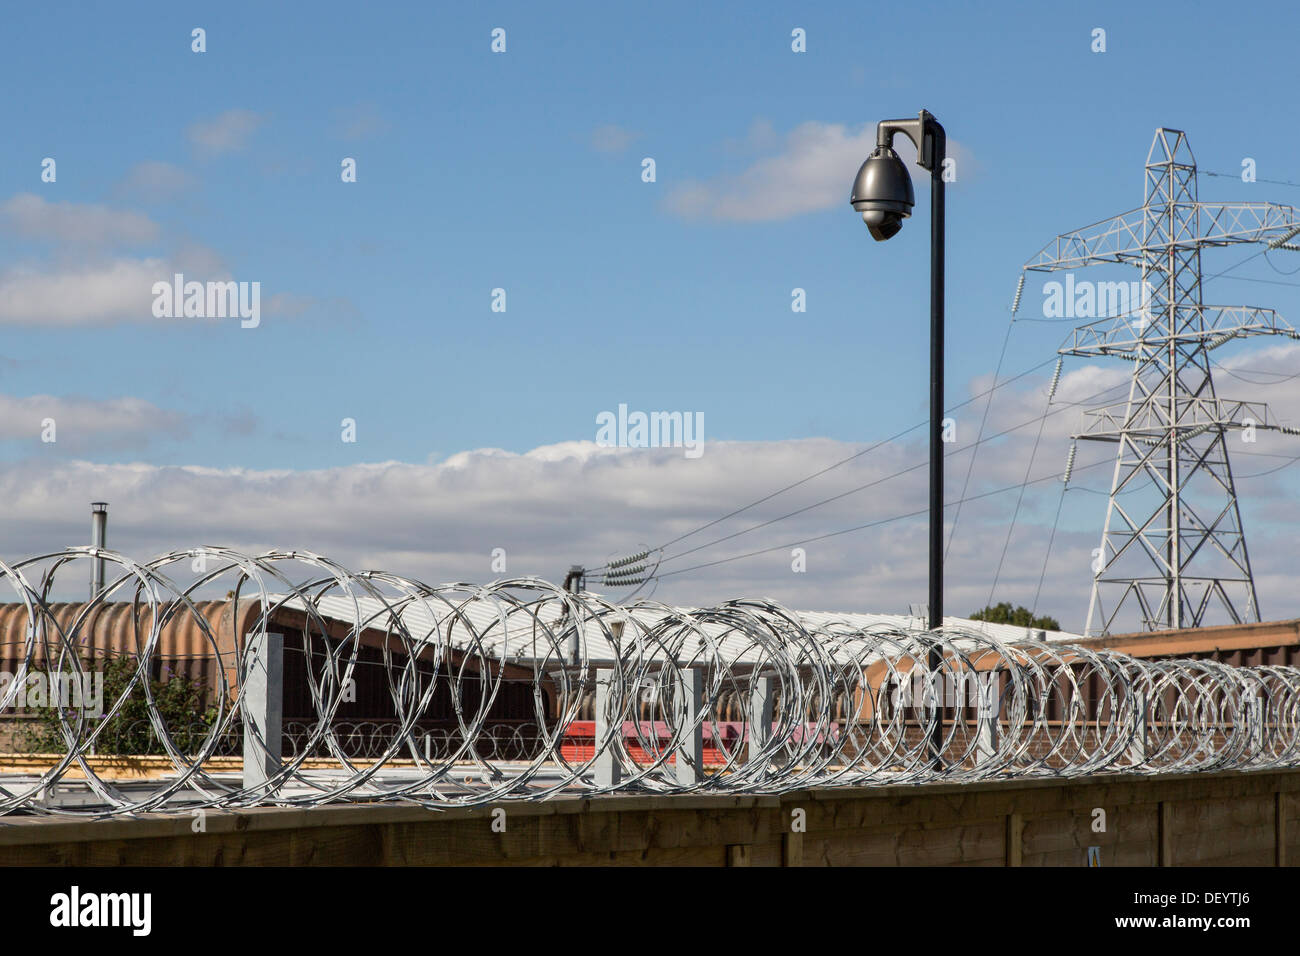 Razor Wire, Barbed wire, security fence, cctv, high security compound, wire coils, big brother is watching Stock Photo